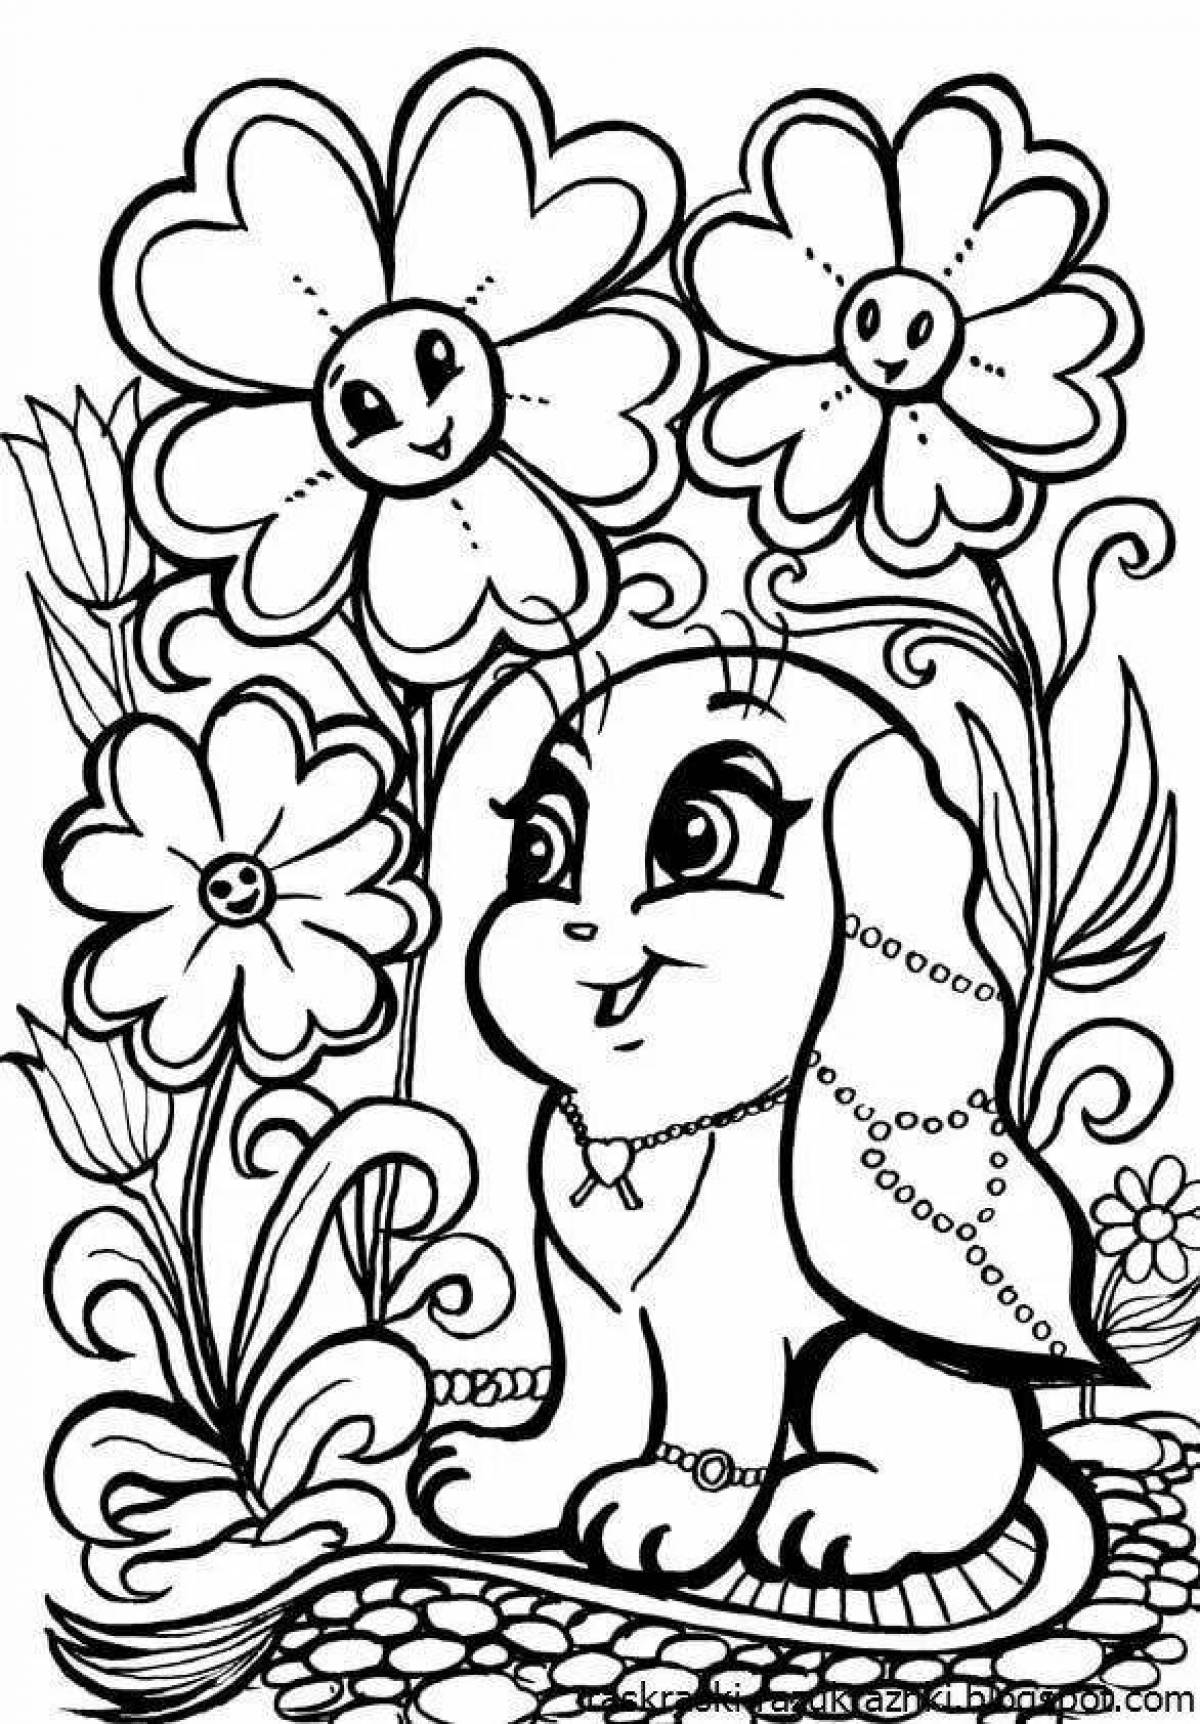 Cute coloring book for girls 7 years old grade 1